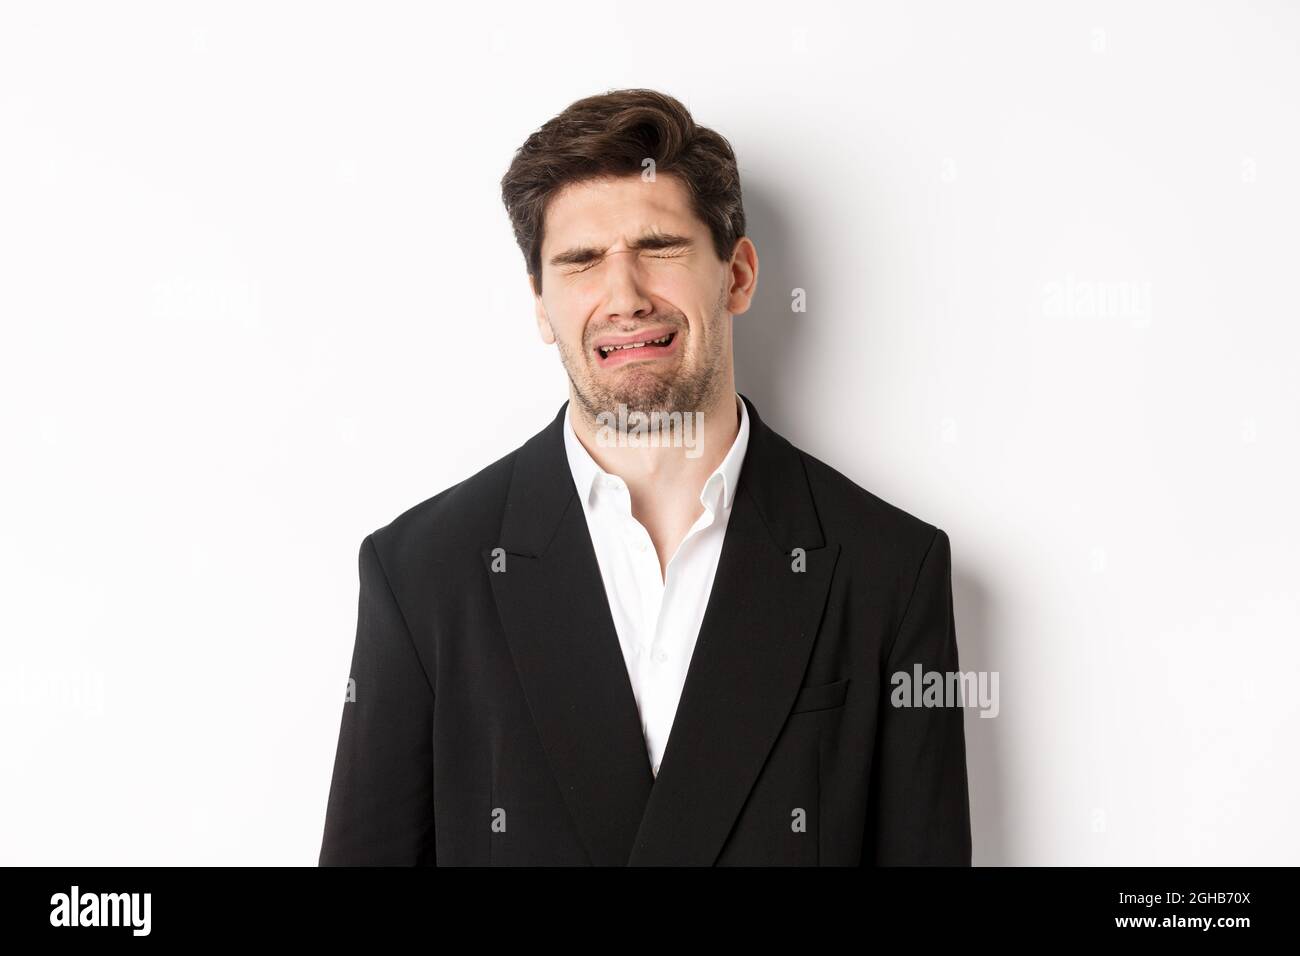 Close-up of miserable man in suit, crying and sobbing, feeling sad, standing against white background. Stock Photo